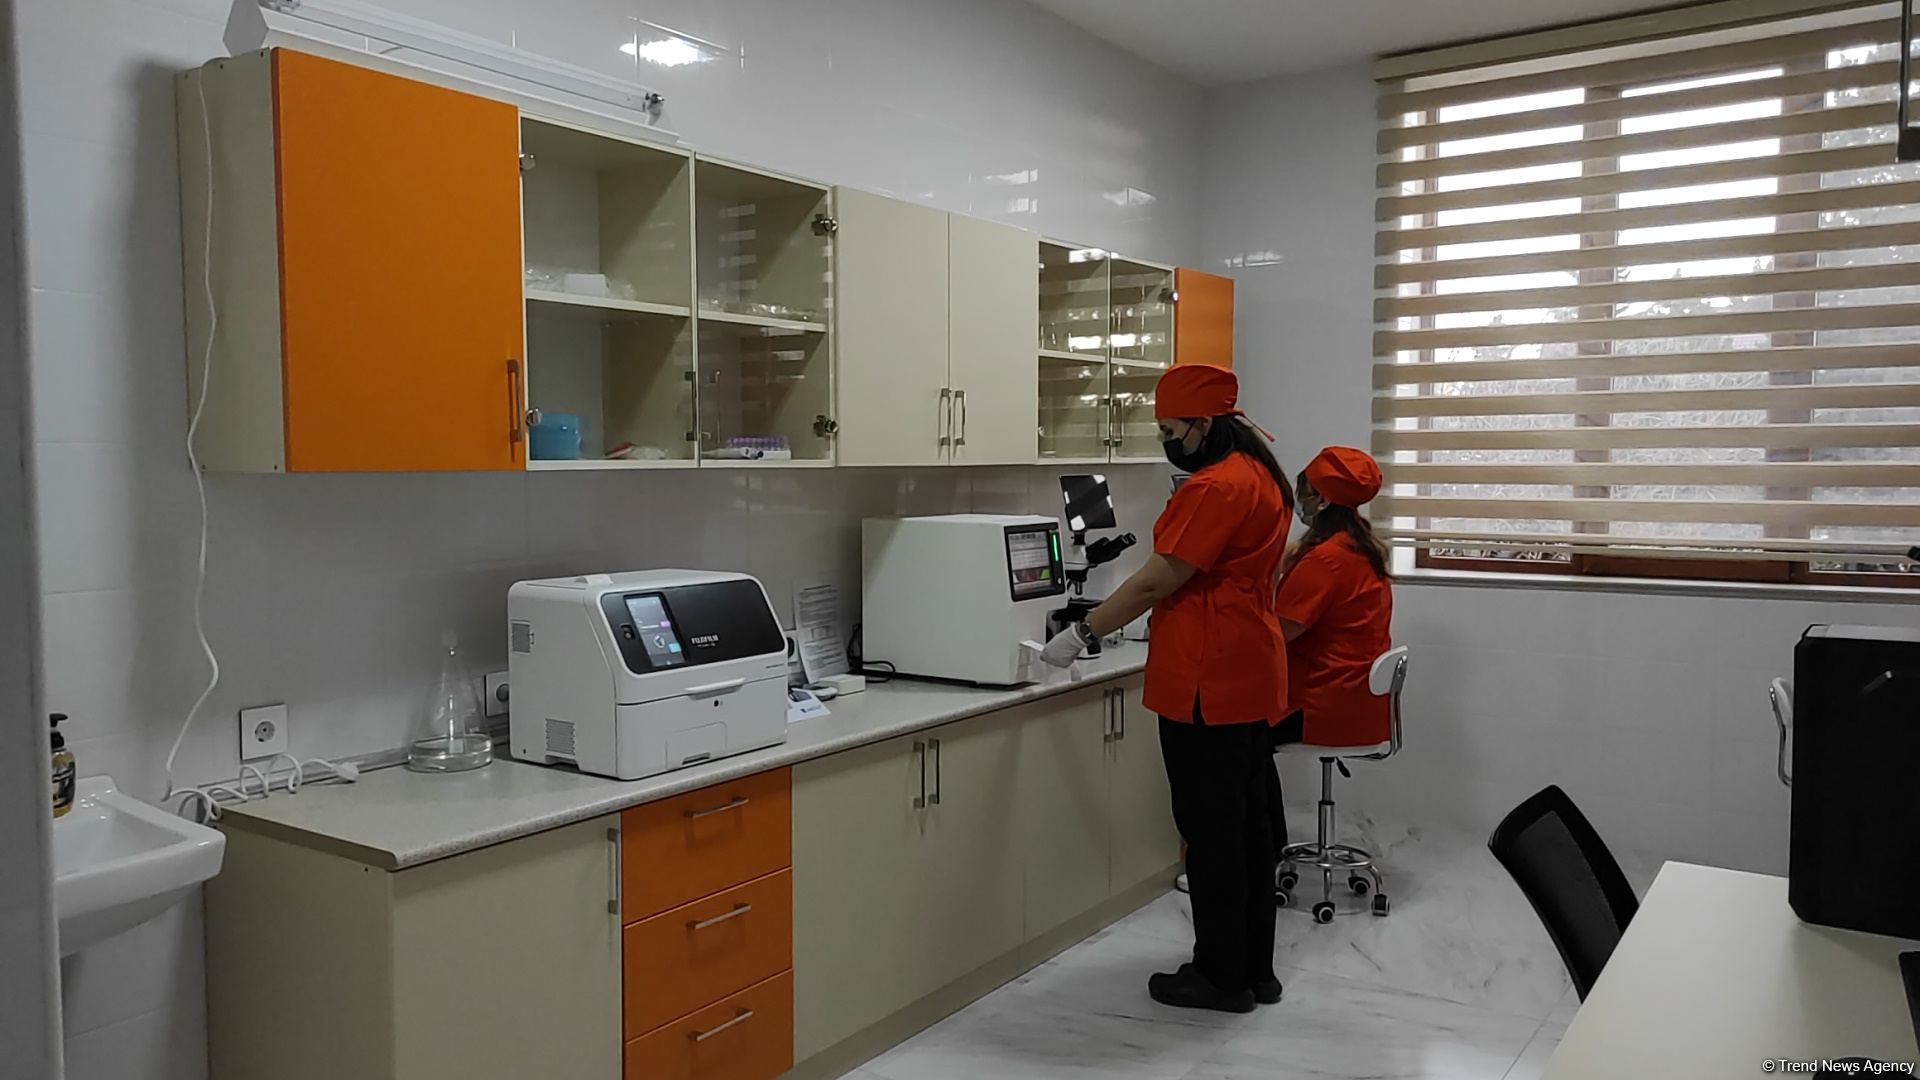 First largest and most modern veterinary clinic in S.Caucasus in Baku already receiving applications - Trend TV (PHOTO/VIDEO)